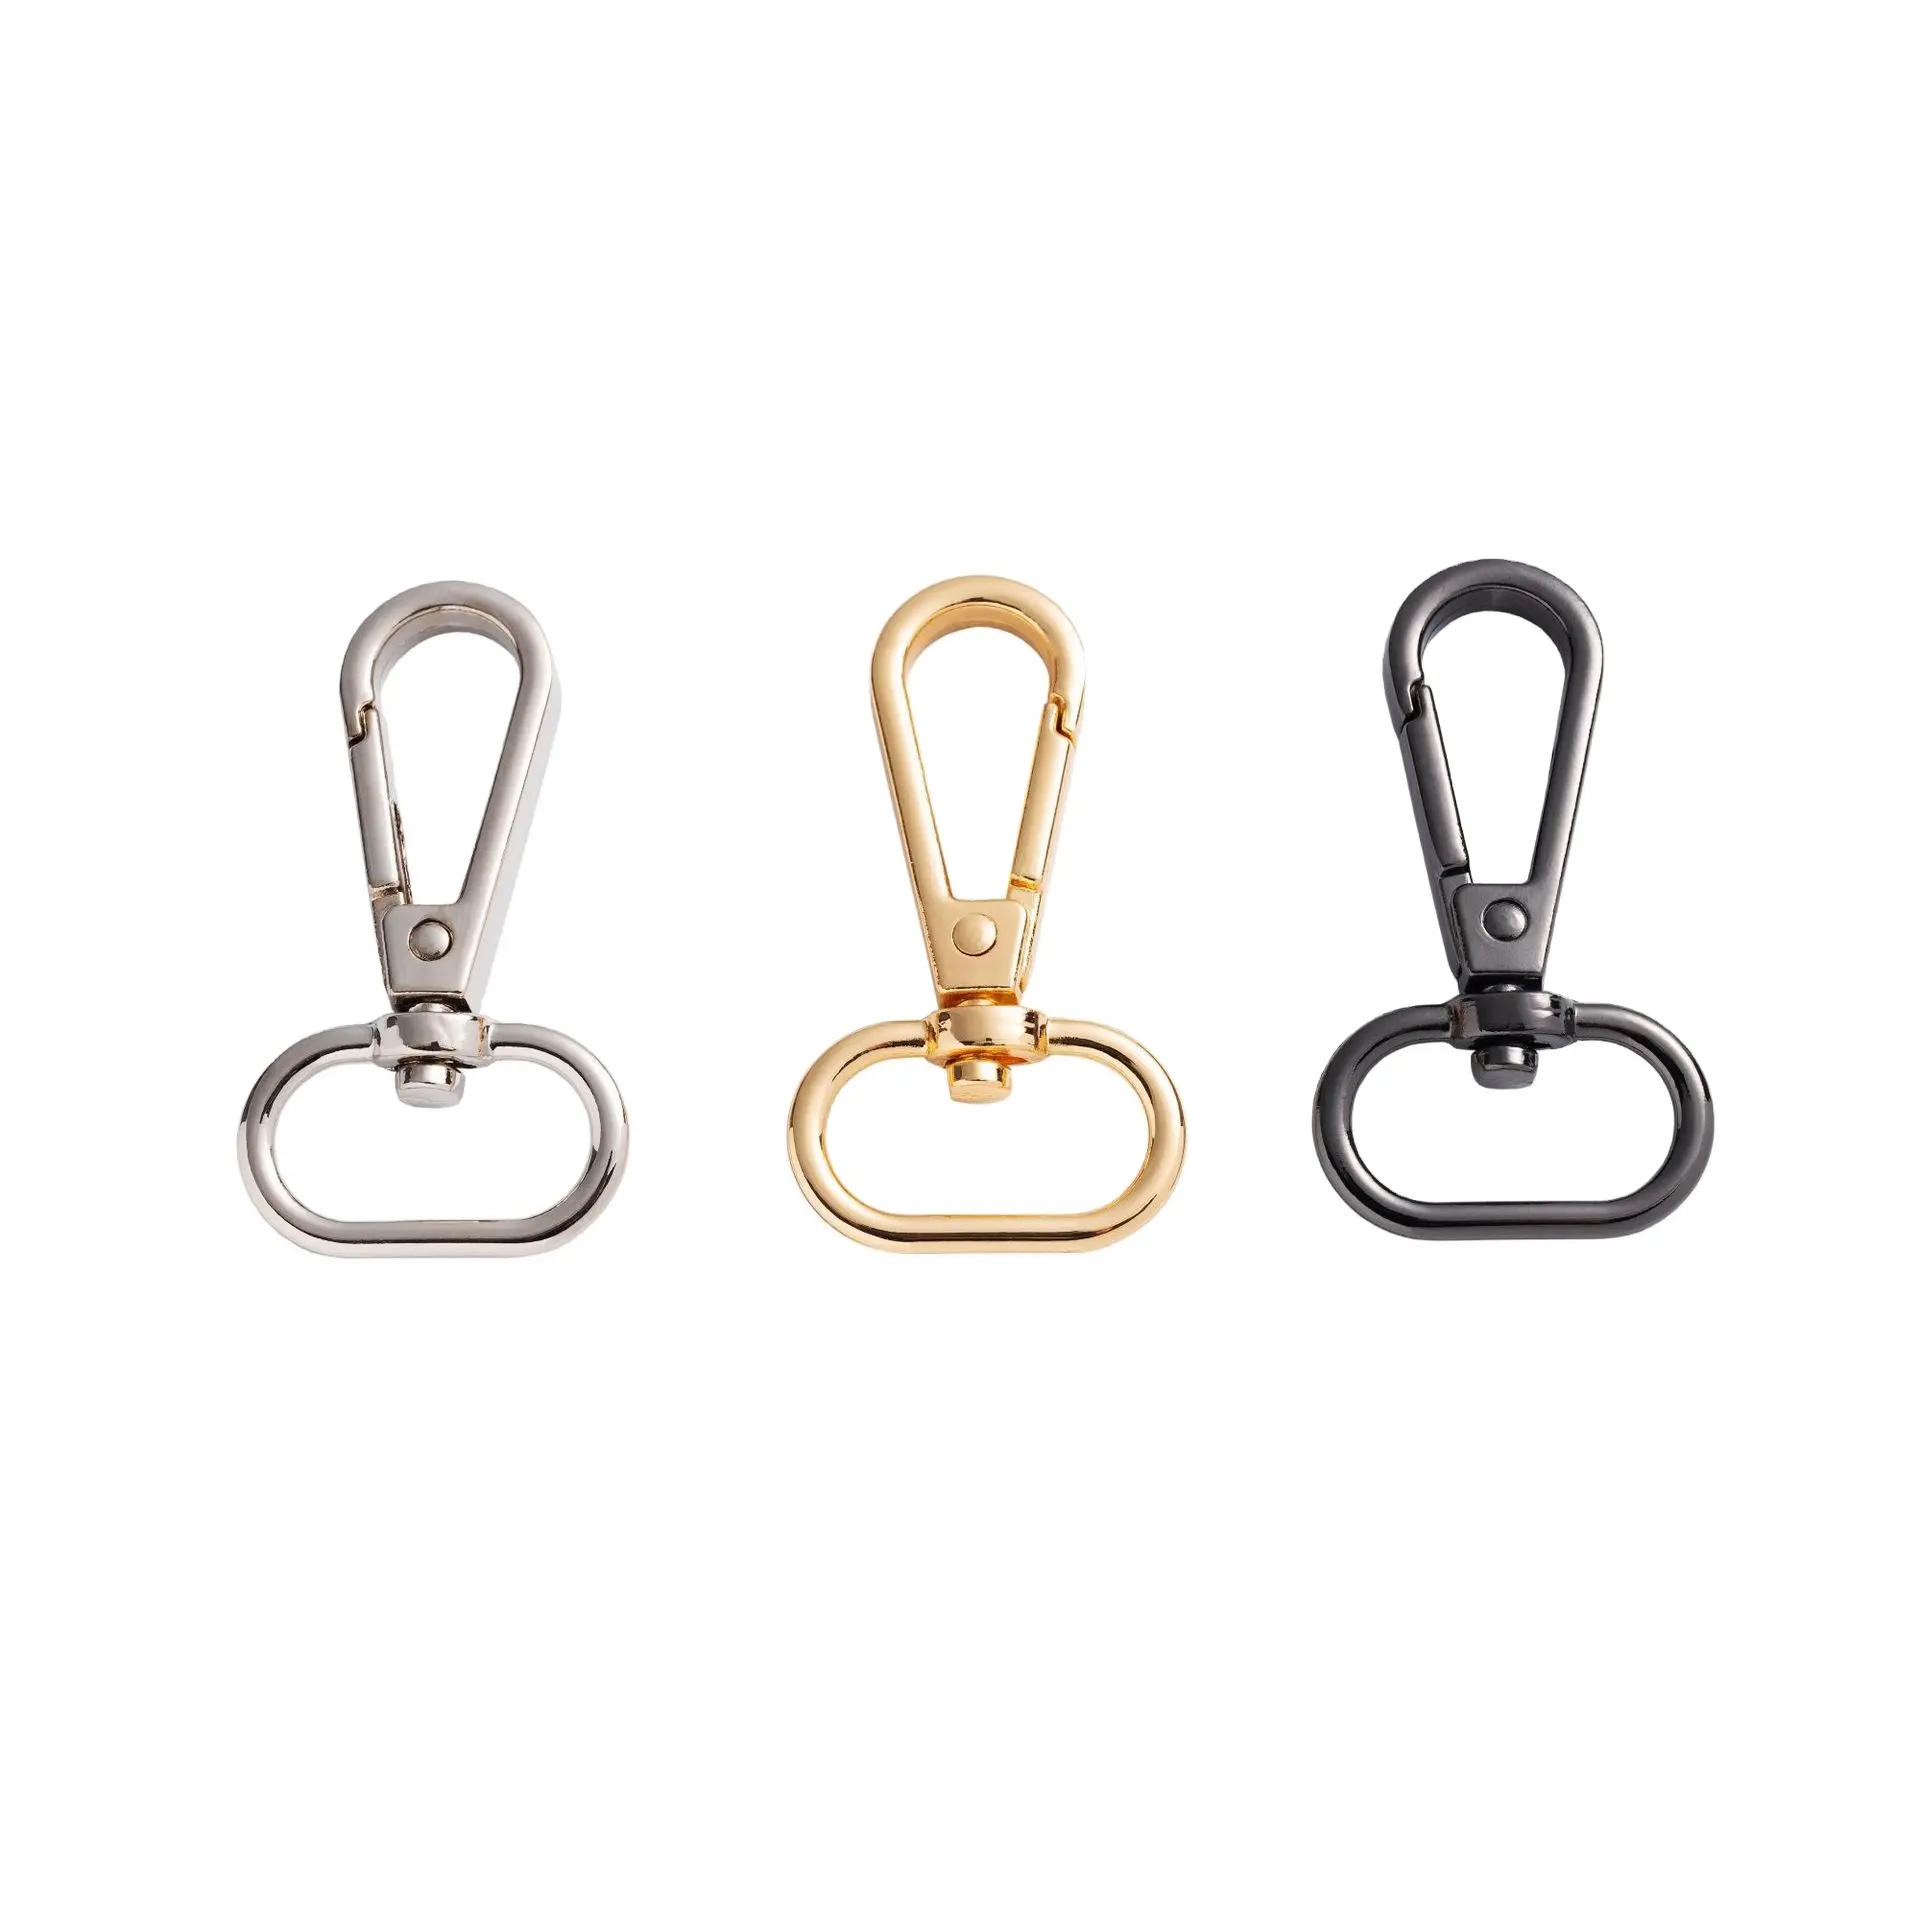 Wholesales Snap Hooks Metal Bag Accessories Keychain Carabiner with Good Quality